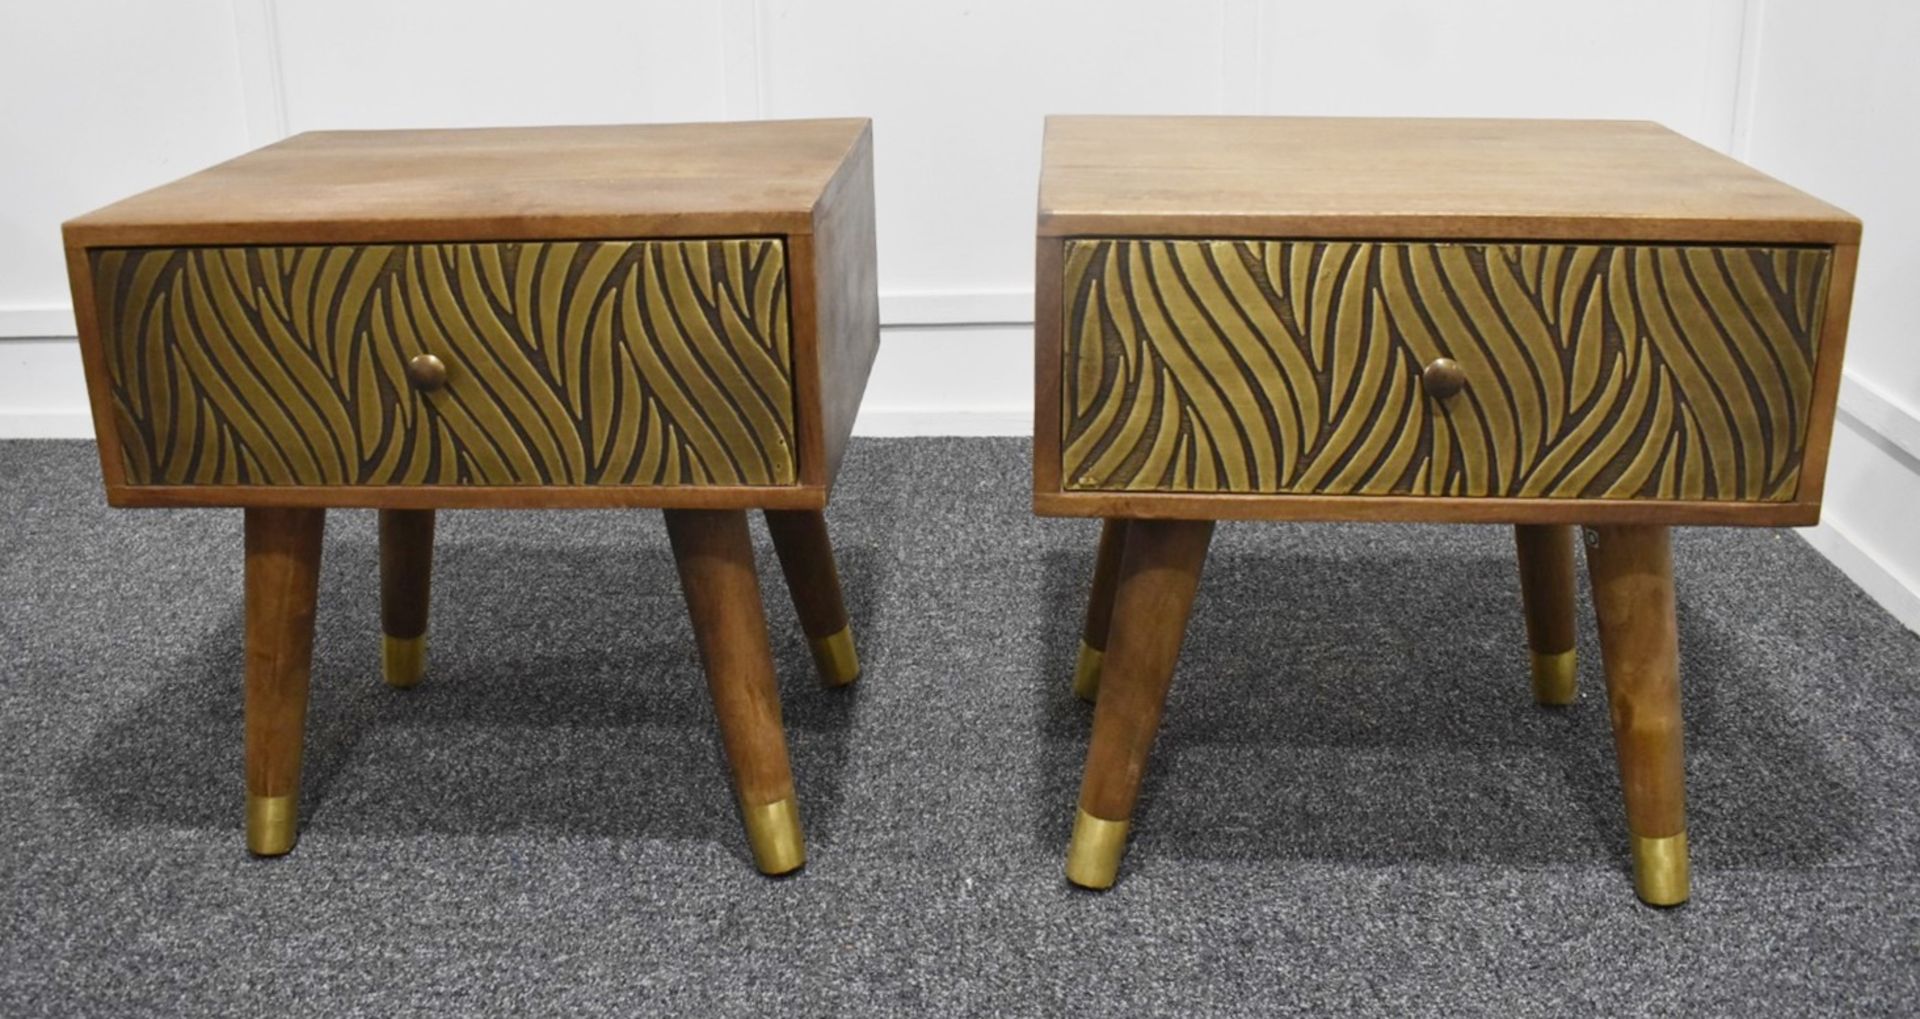 A Pair Of DUTCH IMPORTS Stylish Embossed Leaves Brass Fronted Wooden Bedside Tables with 1-Drawer - Image 2 of 6